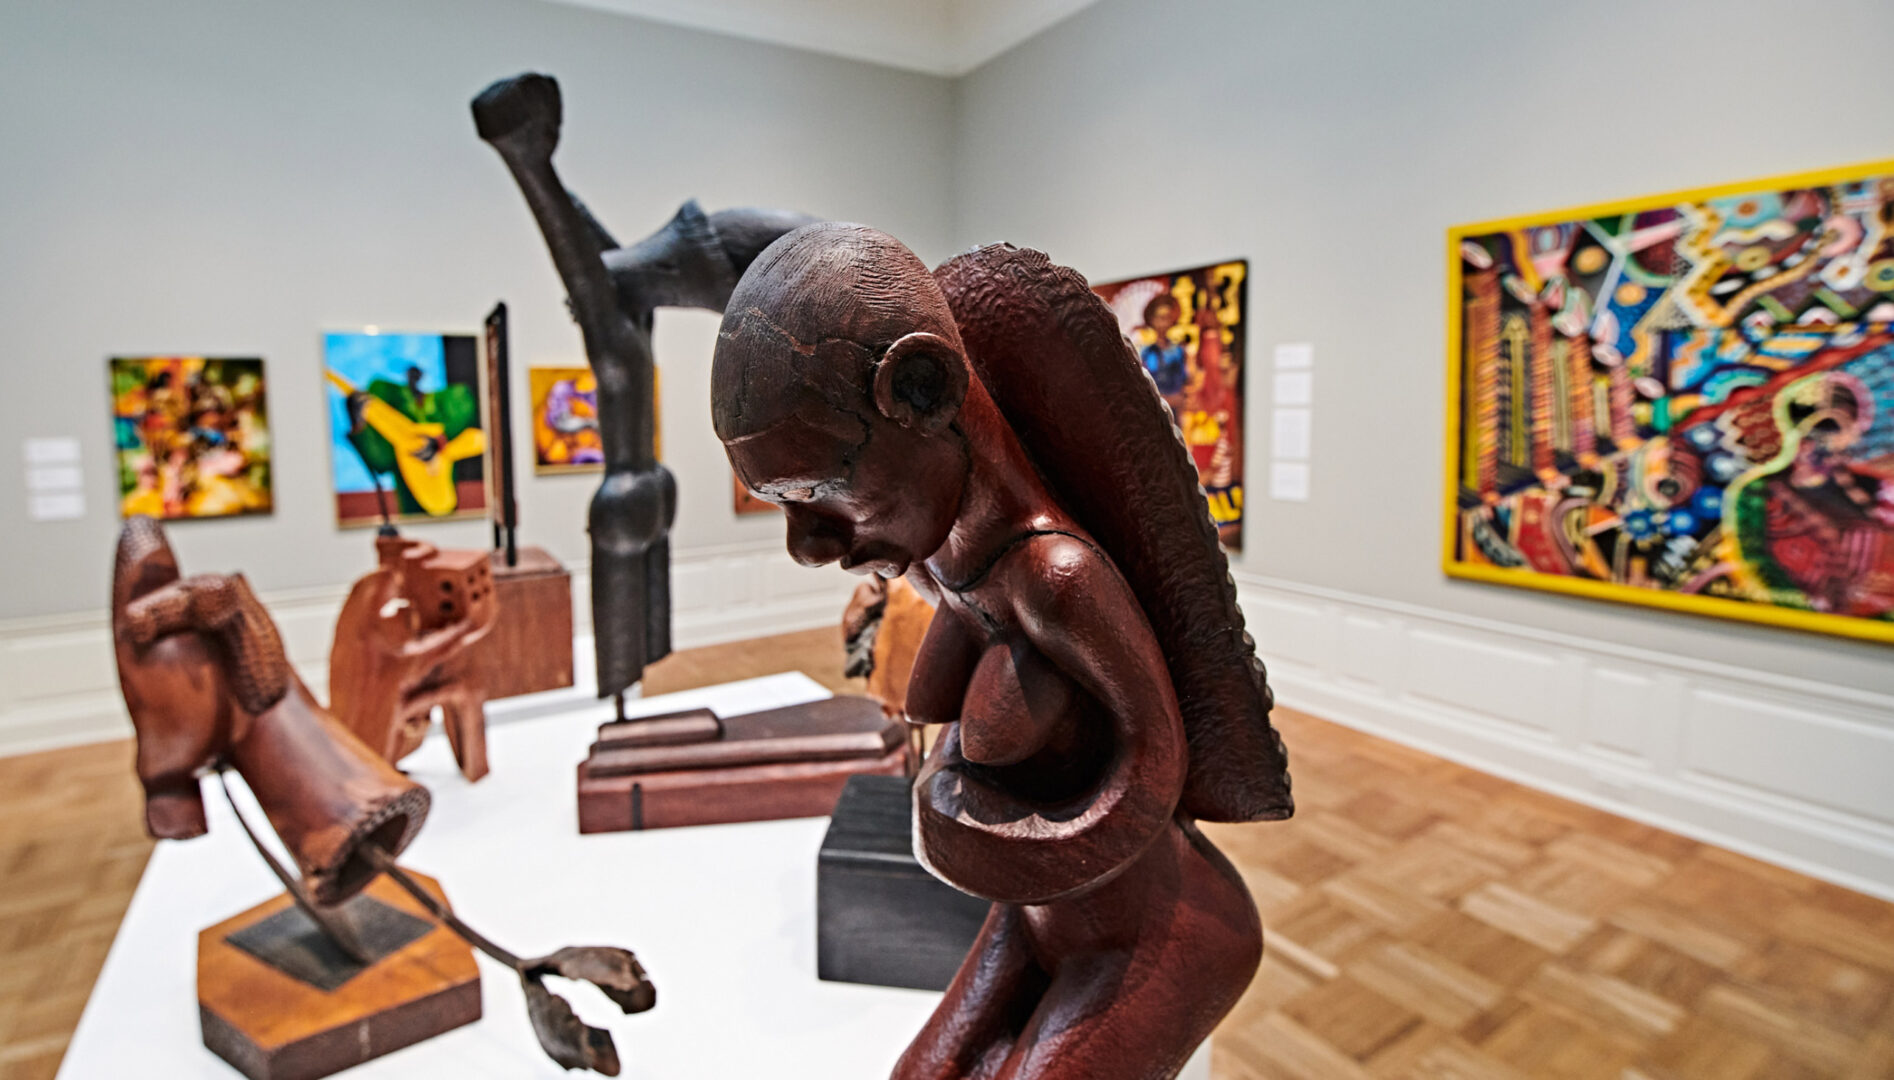 A gallery view with sculptures in the foreground and paintings in the background.